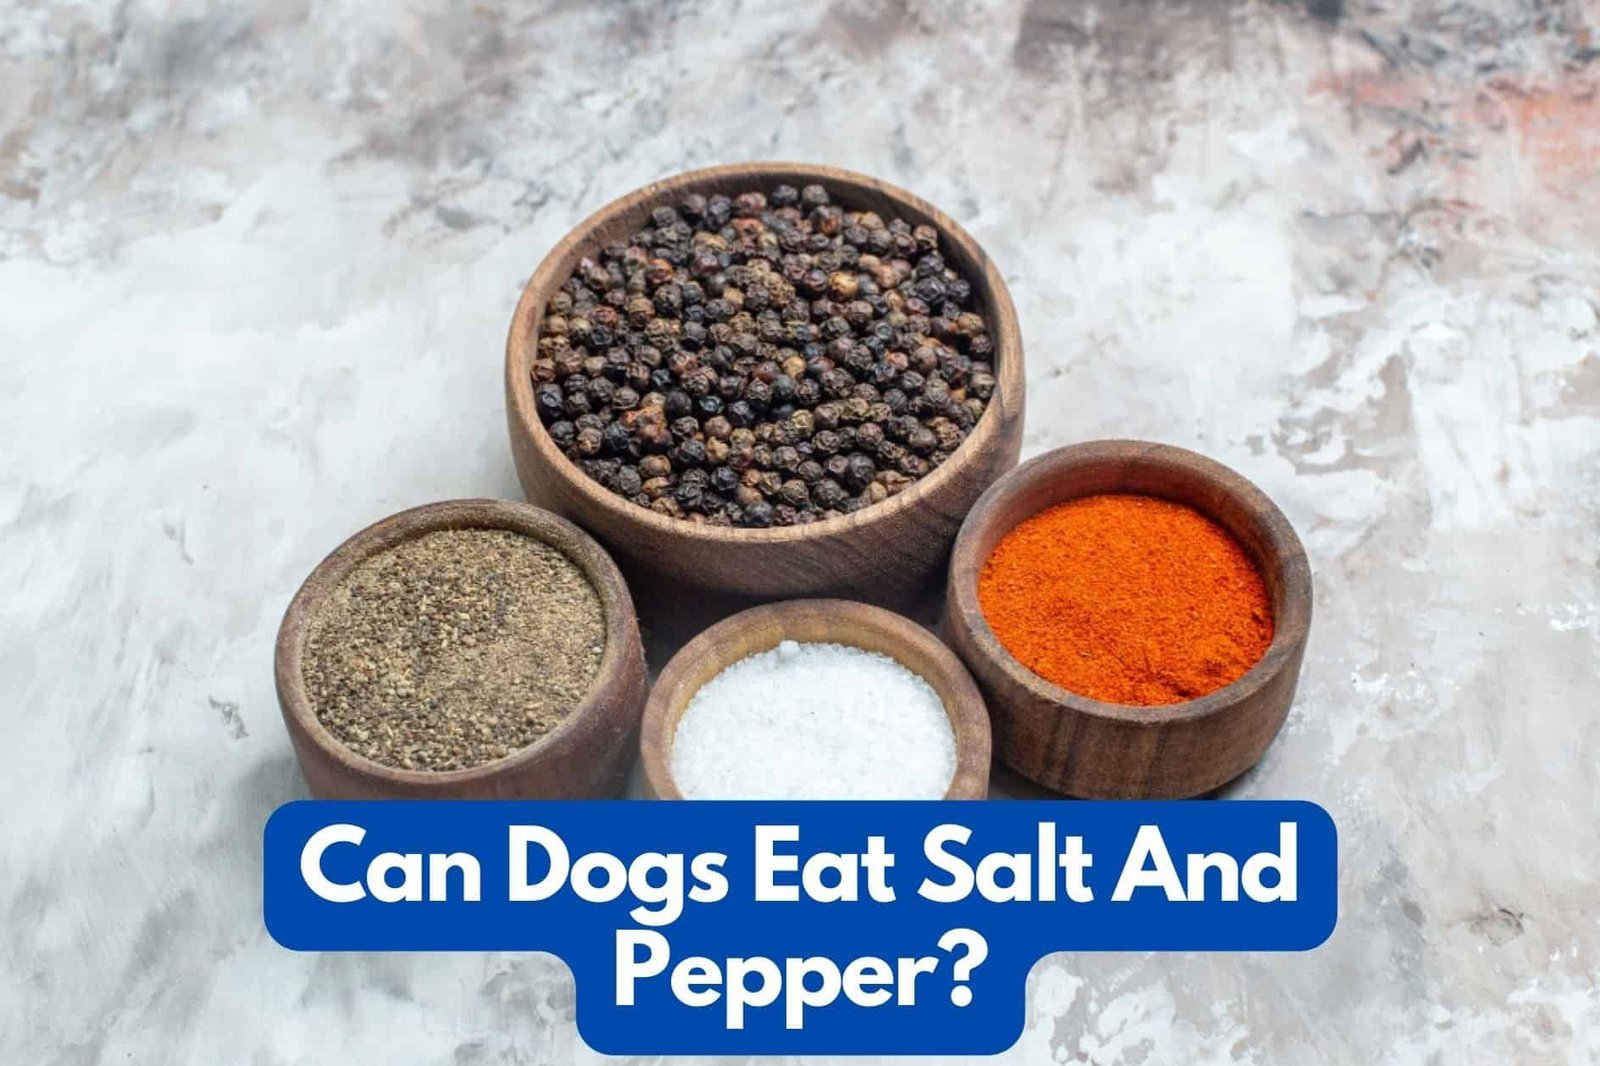 Can dogs eat salt and black pepper